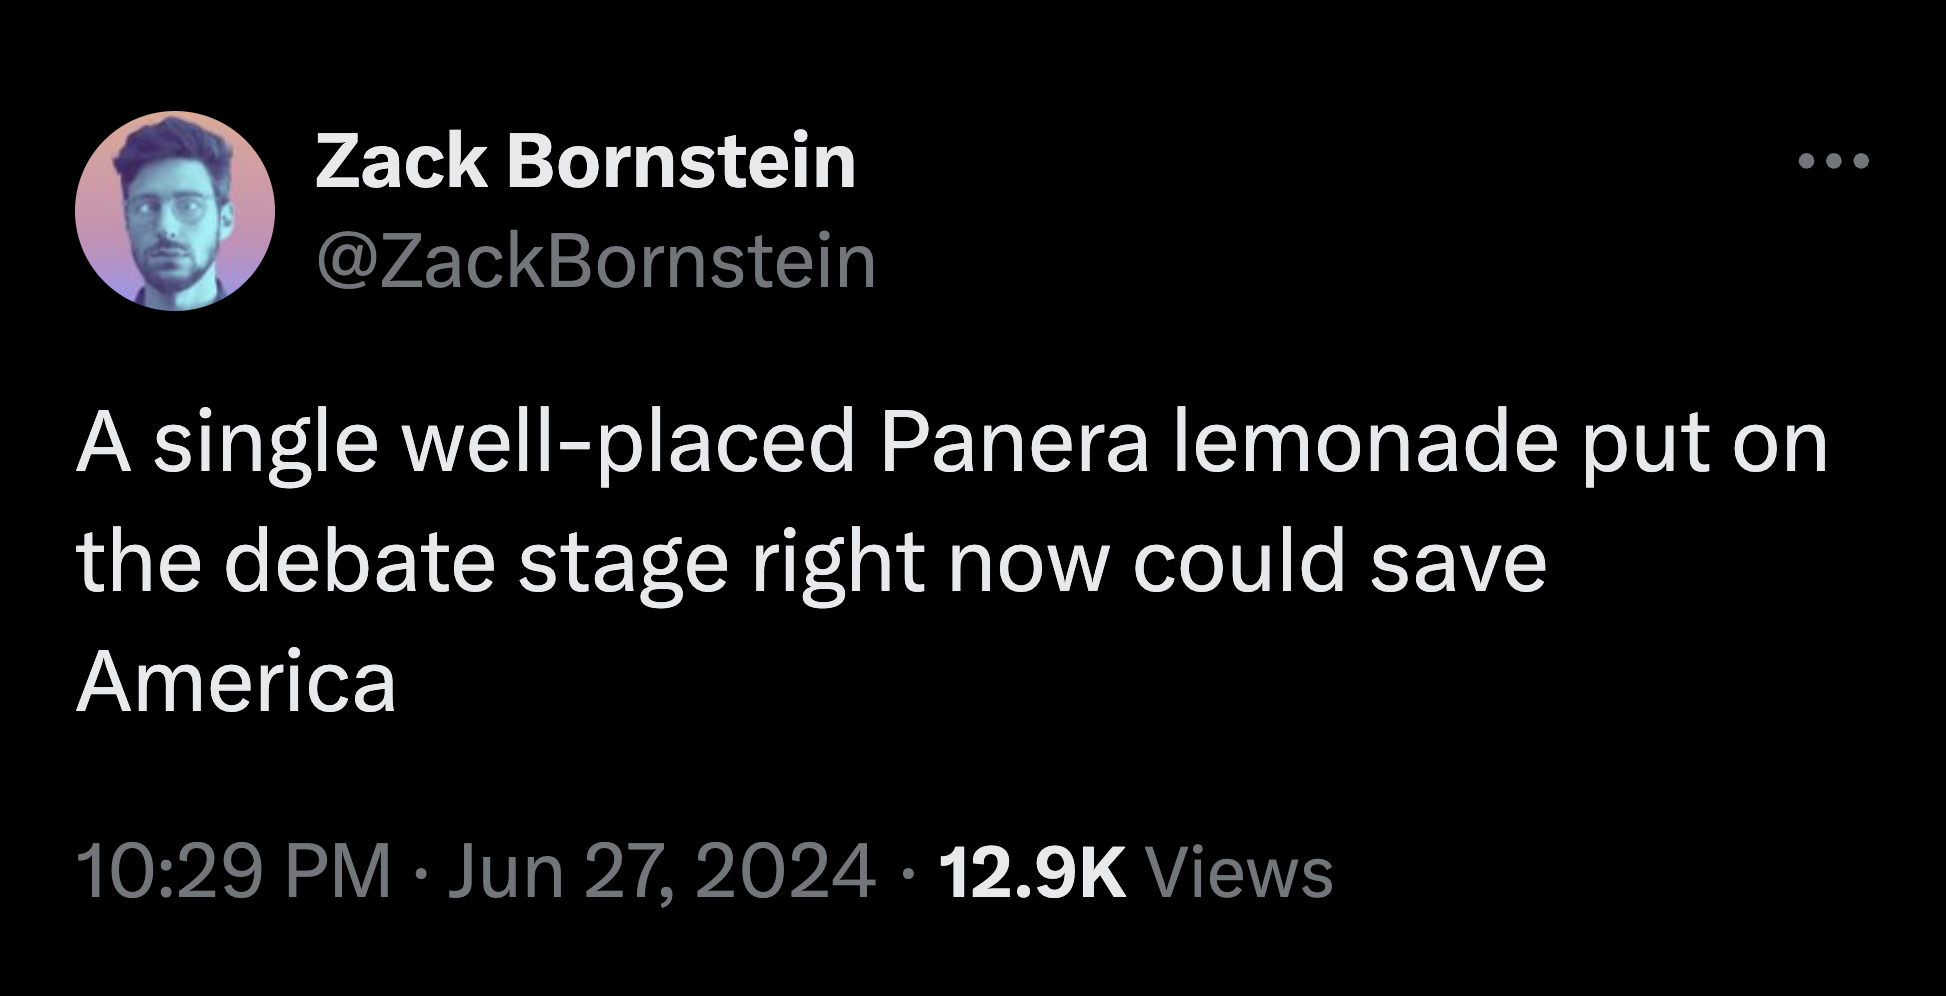 screenshot - Zack Bornstein A single wellplaced Panera lemonade put on the debate stage right now could save America Views